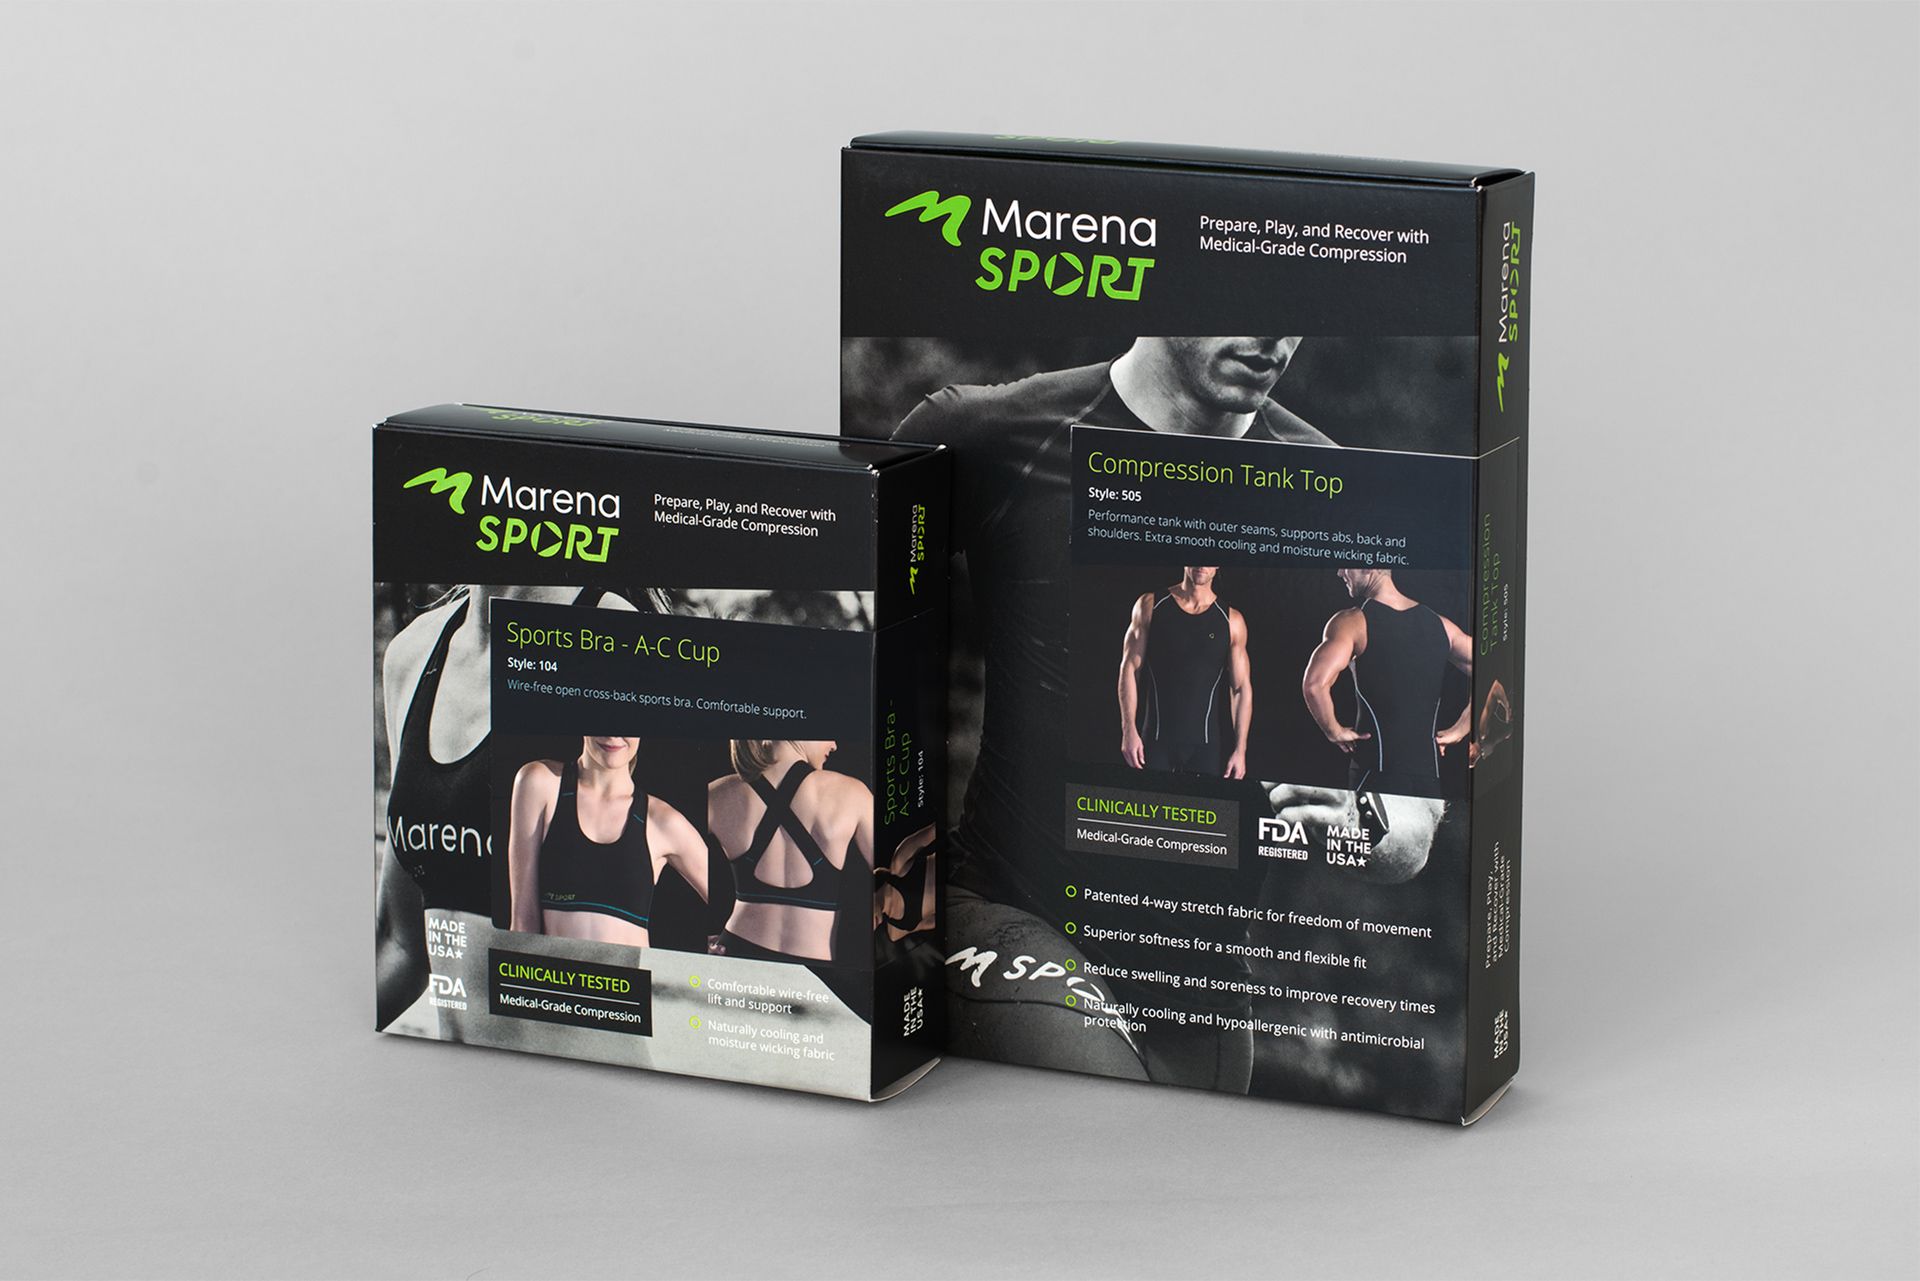 Photograph of the Marena Sport garment packages